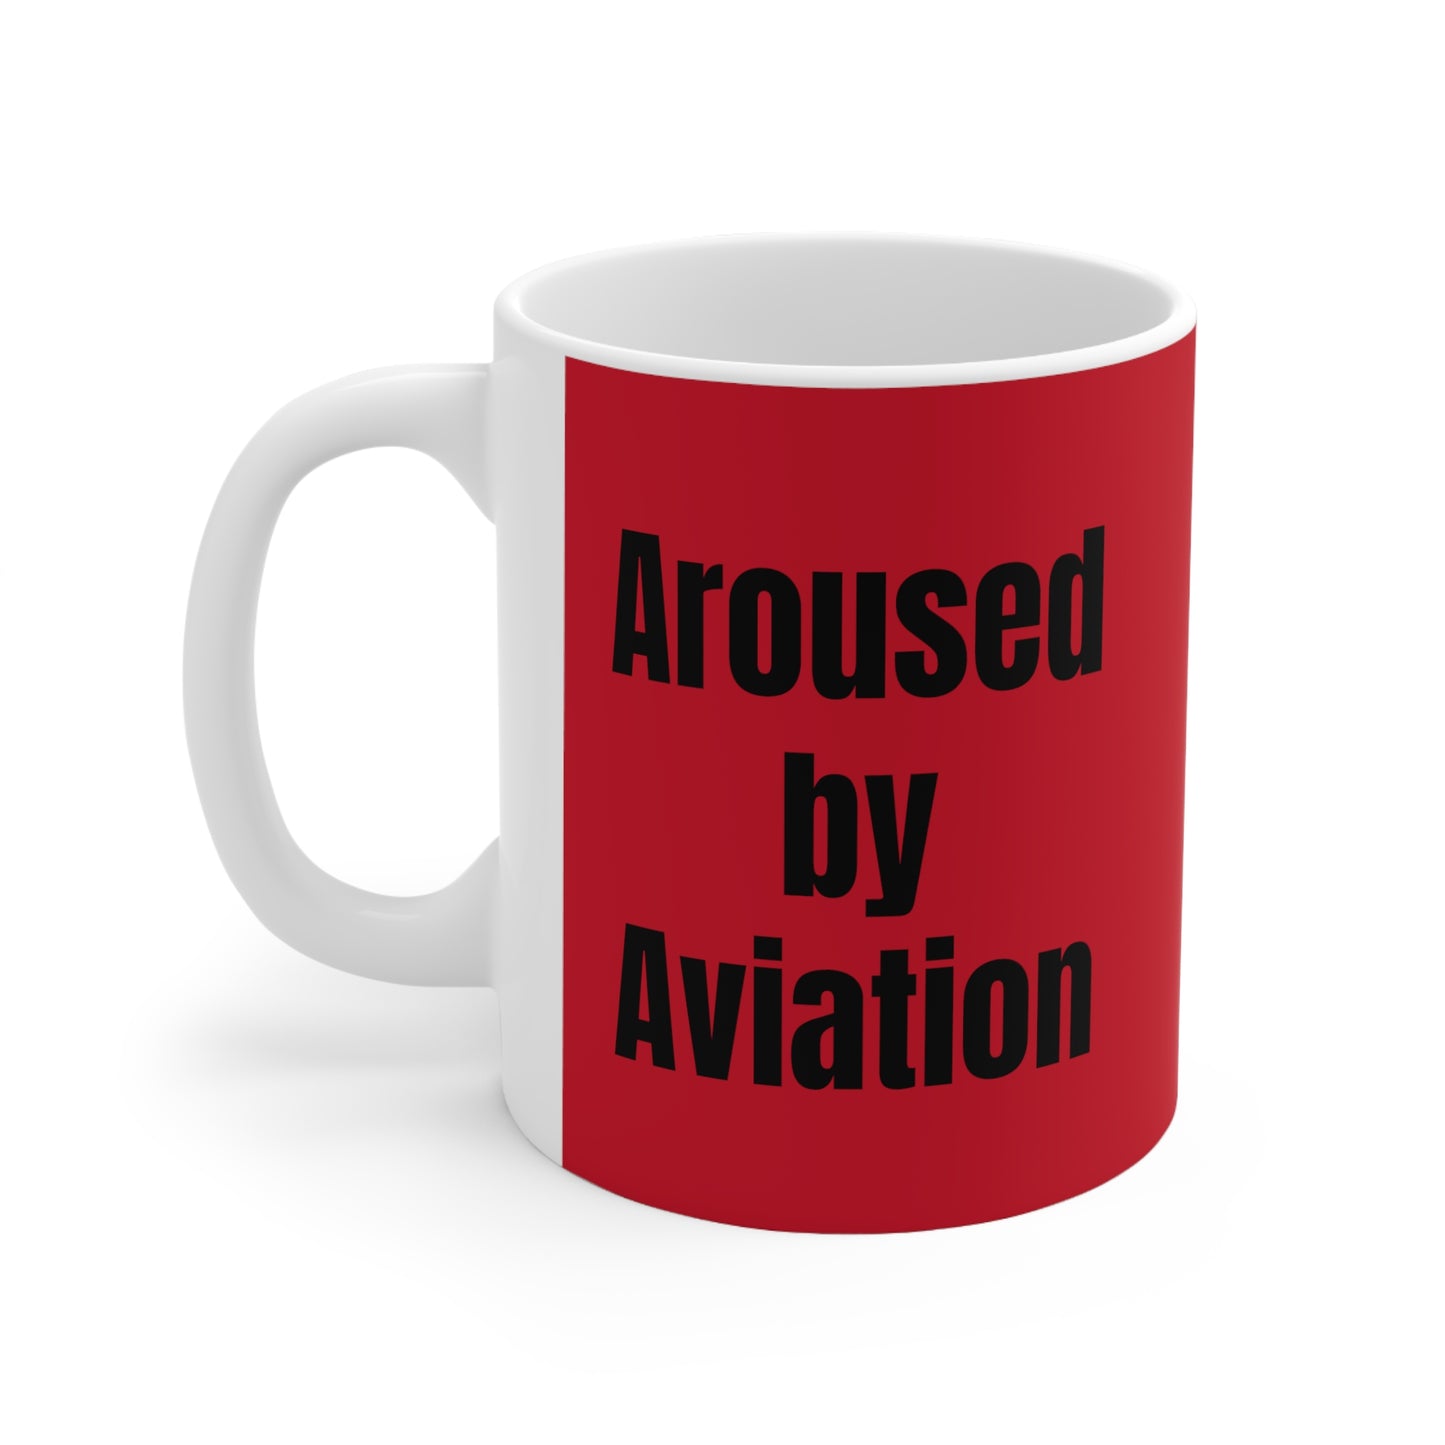 Aerosexual Coffee Cup Red, 11oz